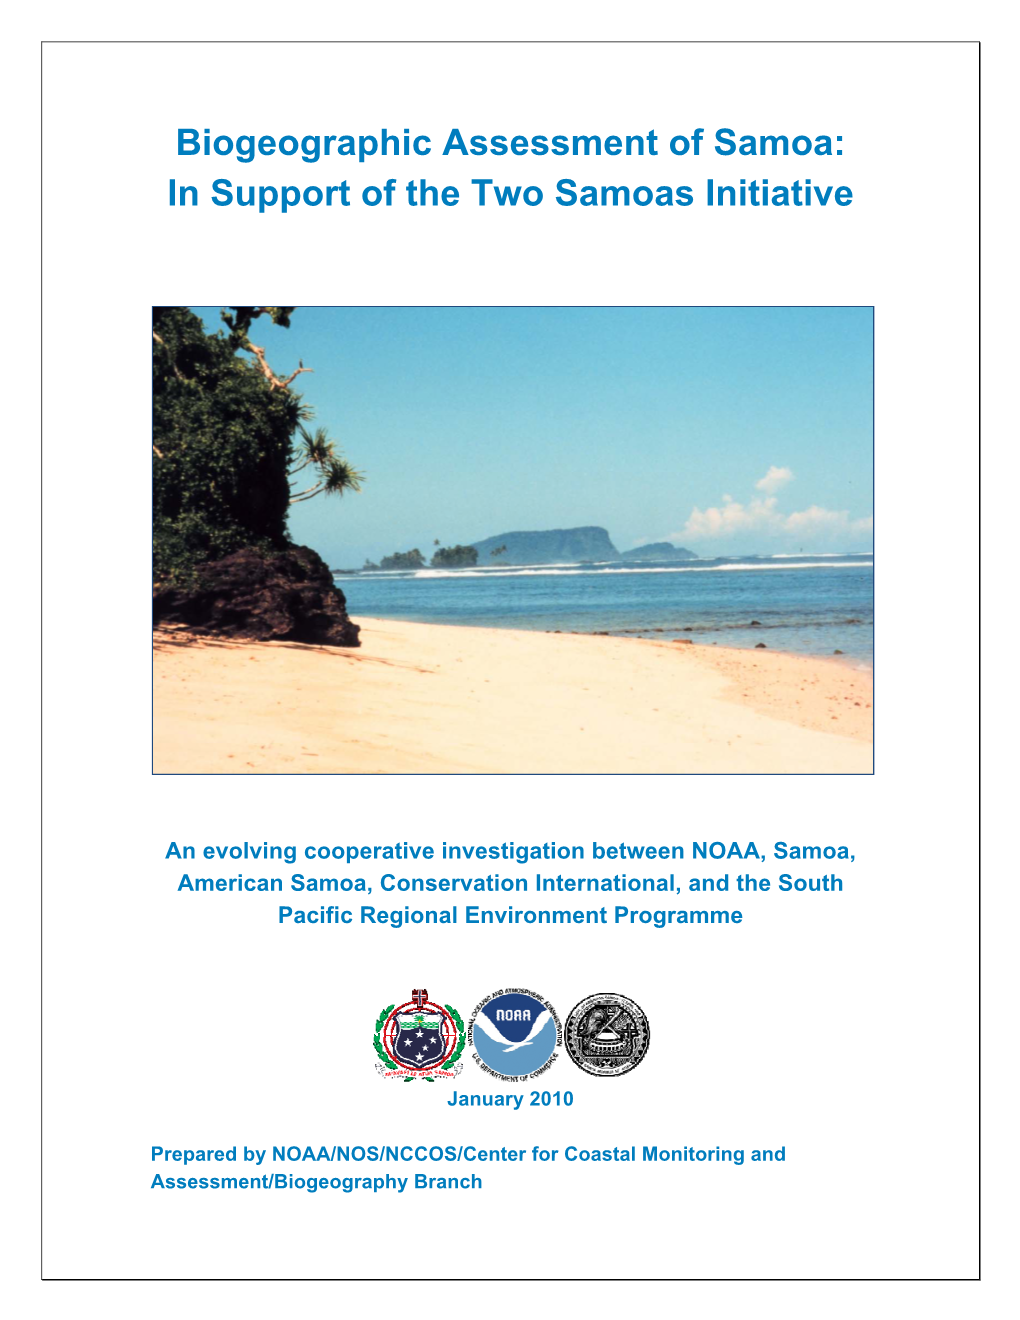 Biogeographic Assessment of Samoa: in Support of the Two Samoas Initiative